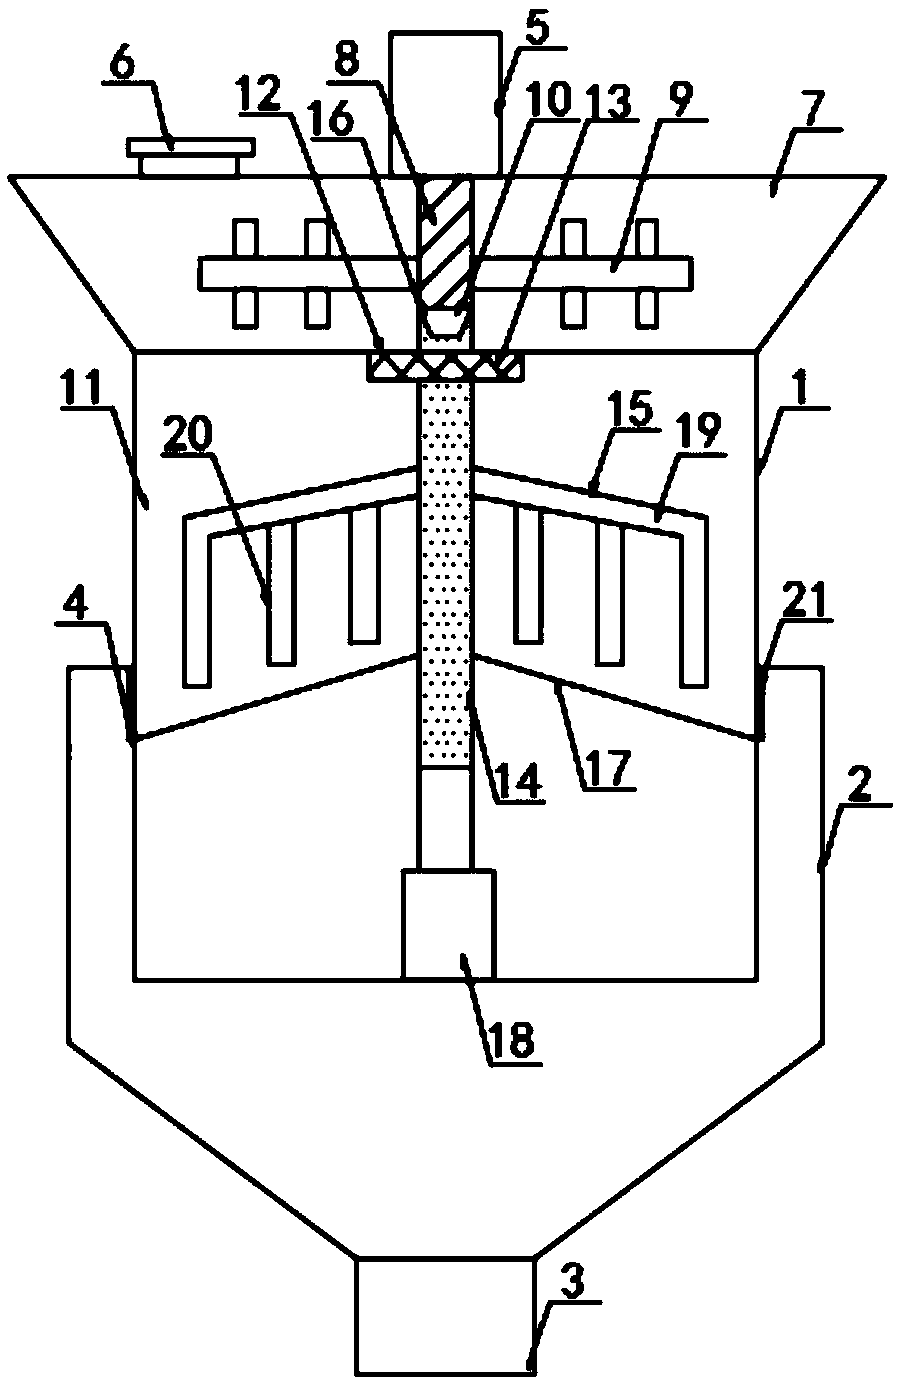 Compound feed machining and feeding mechanism